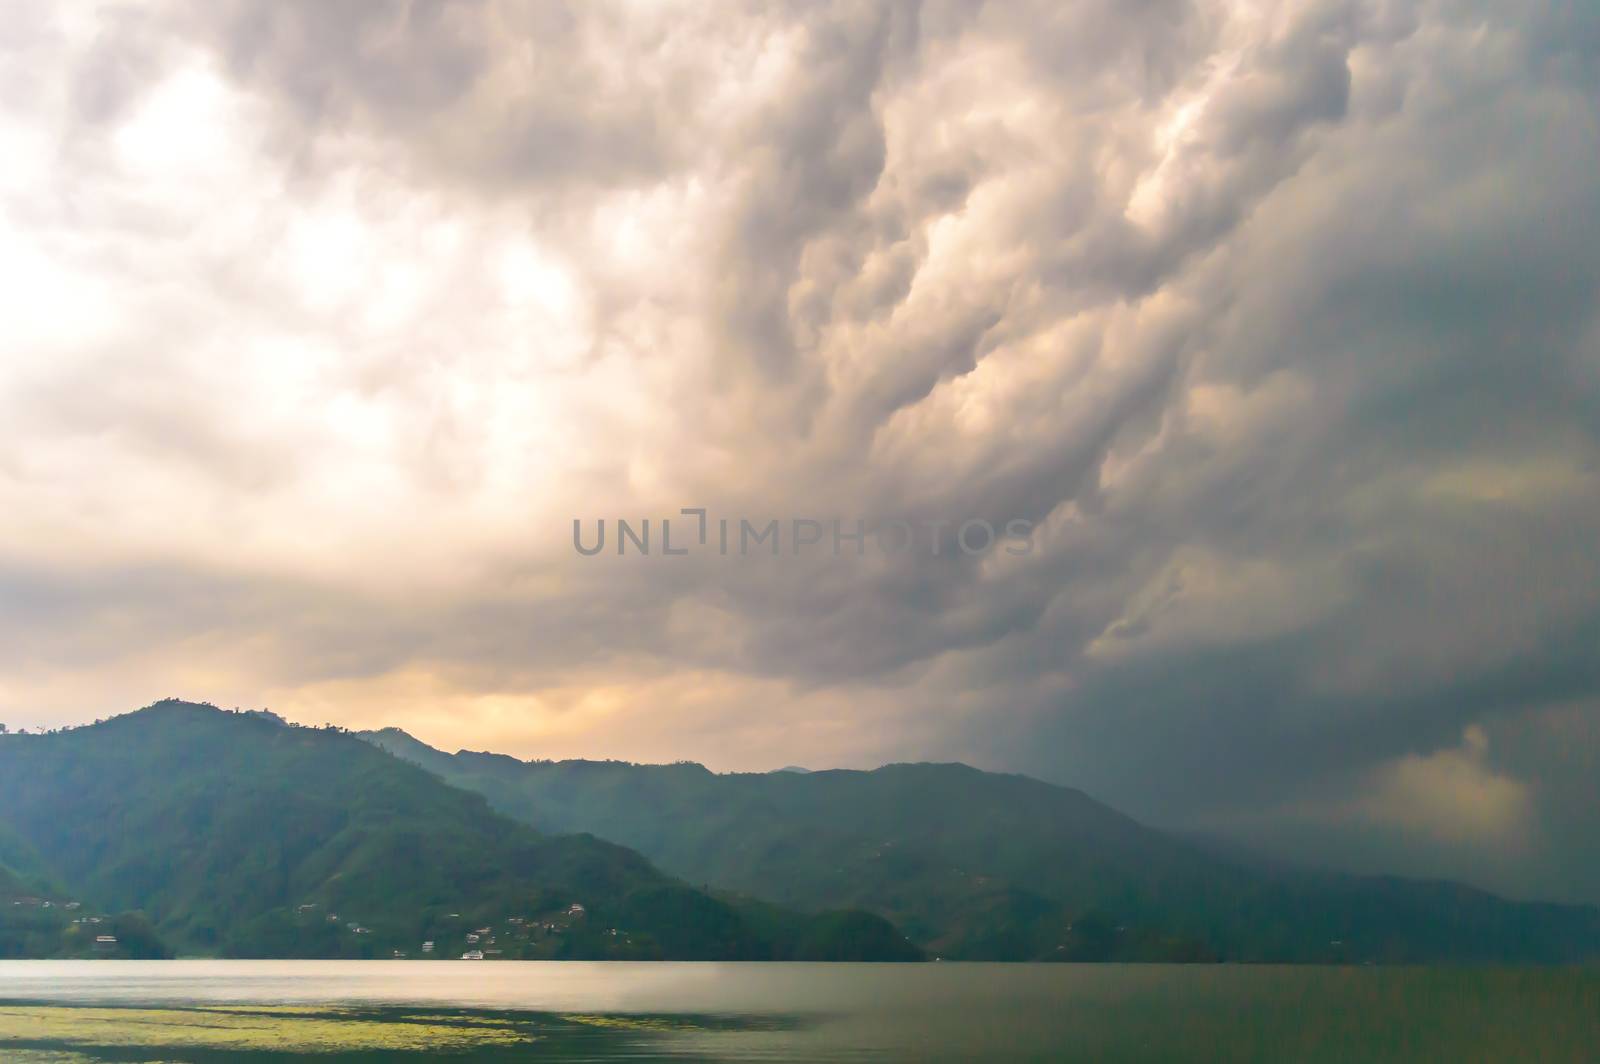 Photograph of cloud, lake, mountain and reflexion Near Pokhara Lake at Kathmandu Nepal. Snap in portrait, landscape, wide screen. Vintage film look. Nature Freedom, Vivid, Energy, Environment Concept.